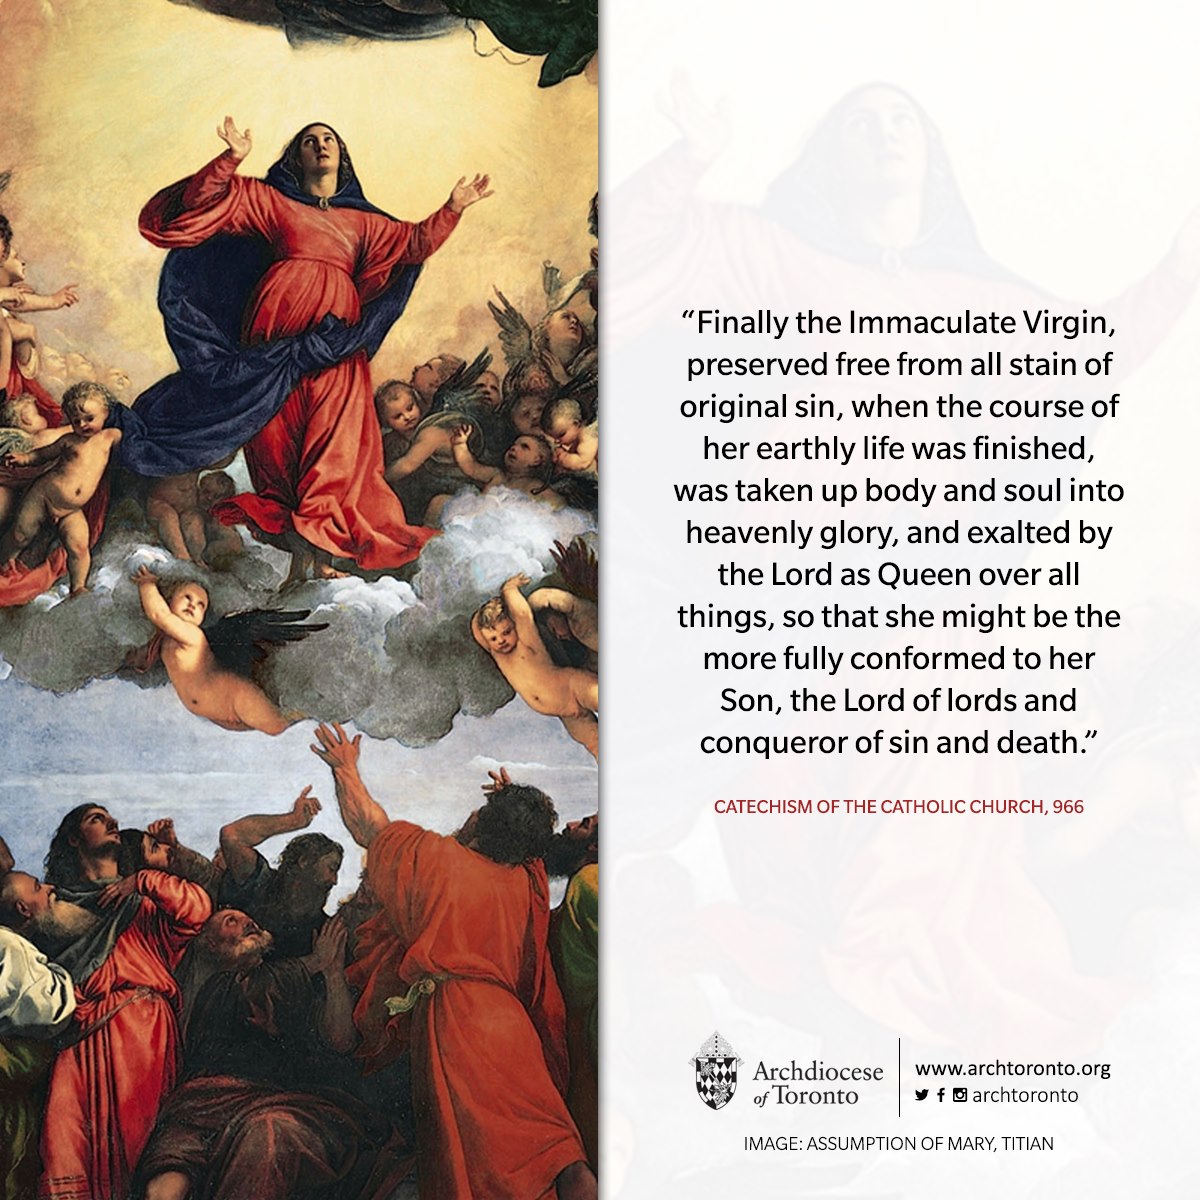 A info graphic showing a painting of Mary being assumed into heaven, with information from Catechism